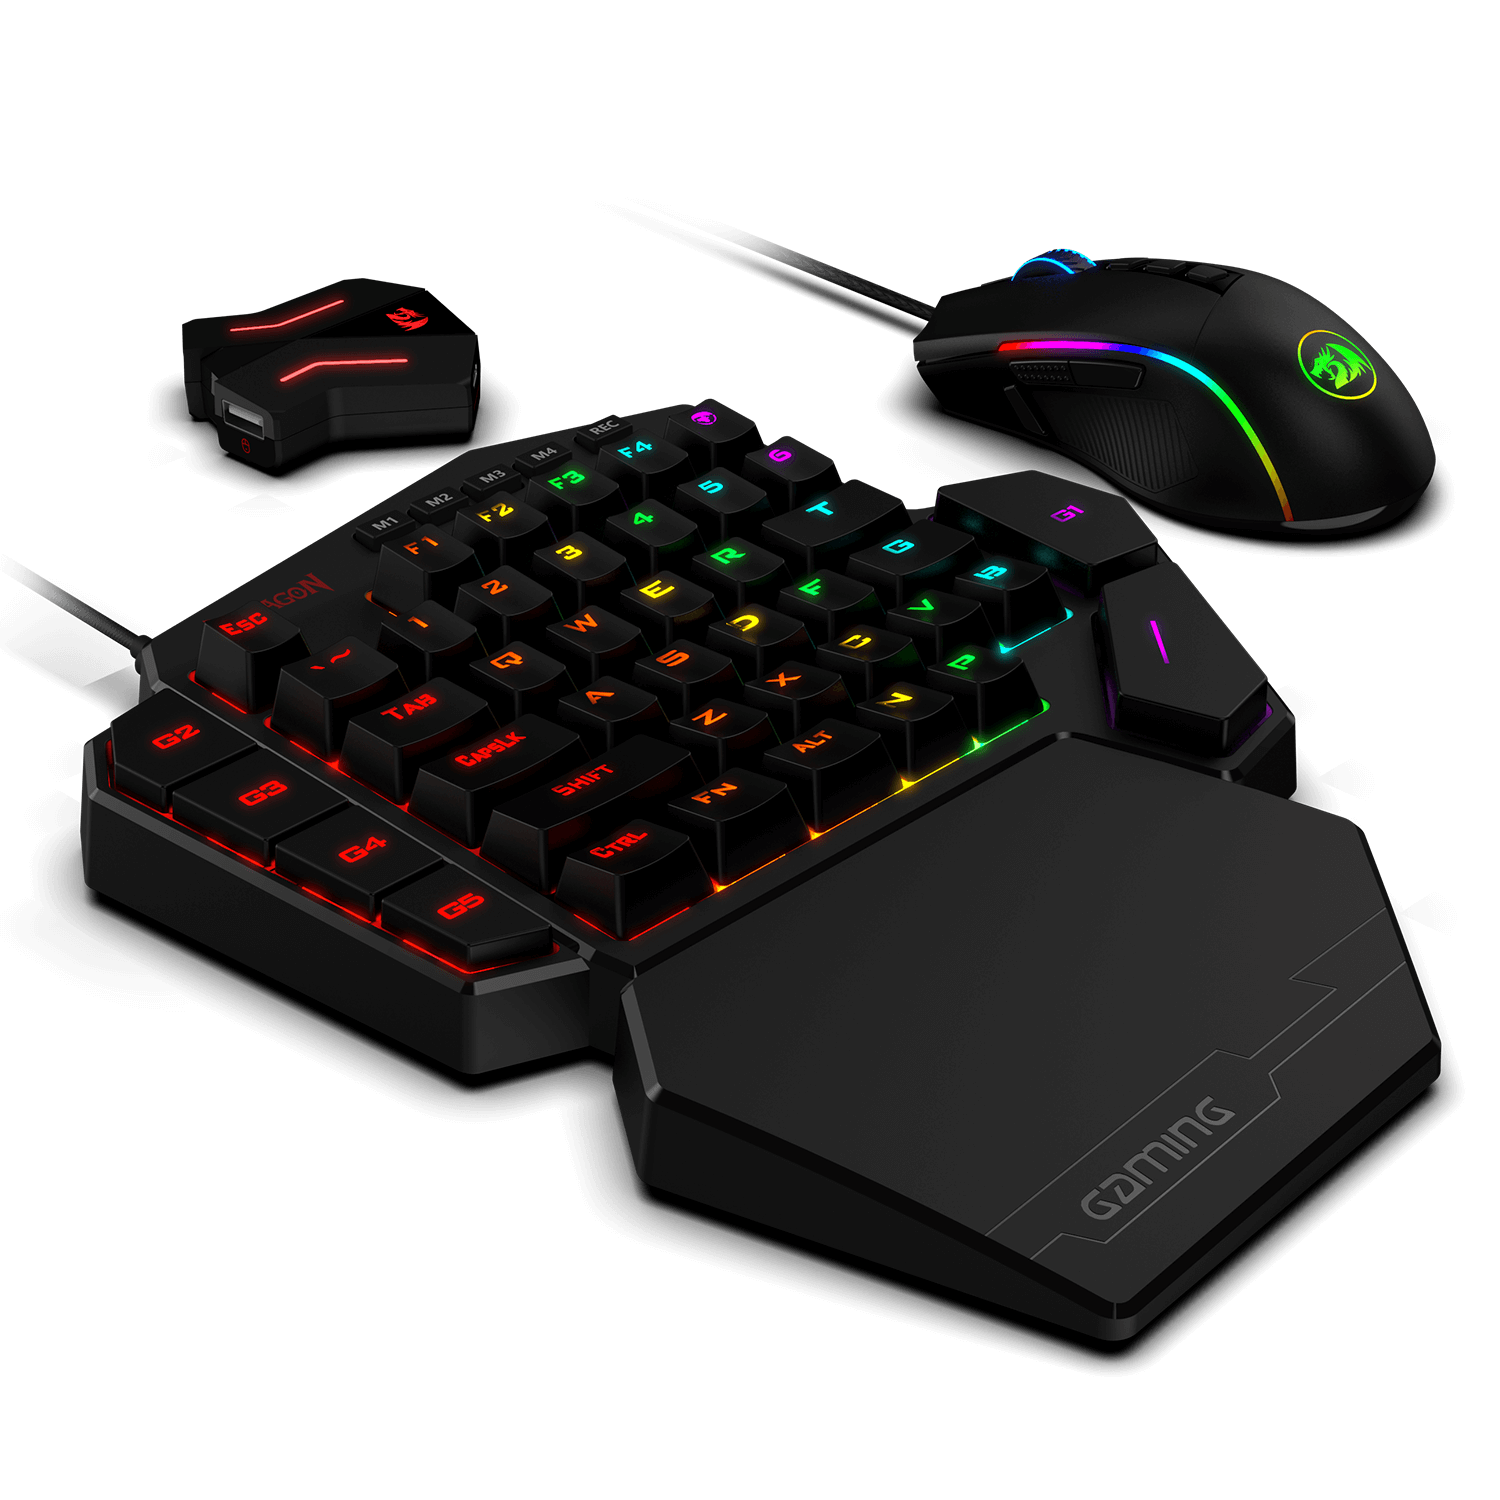 Redragon K585 One-handed RGB Gaming Keyboard and M721-Pro Mouse ps4 adapterCombo